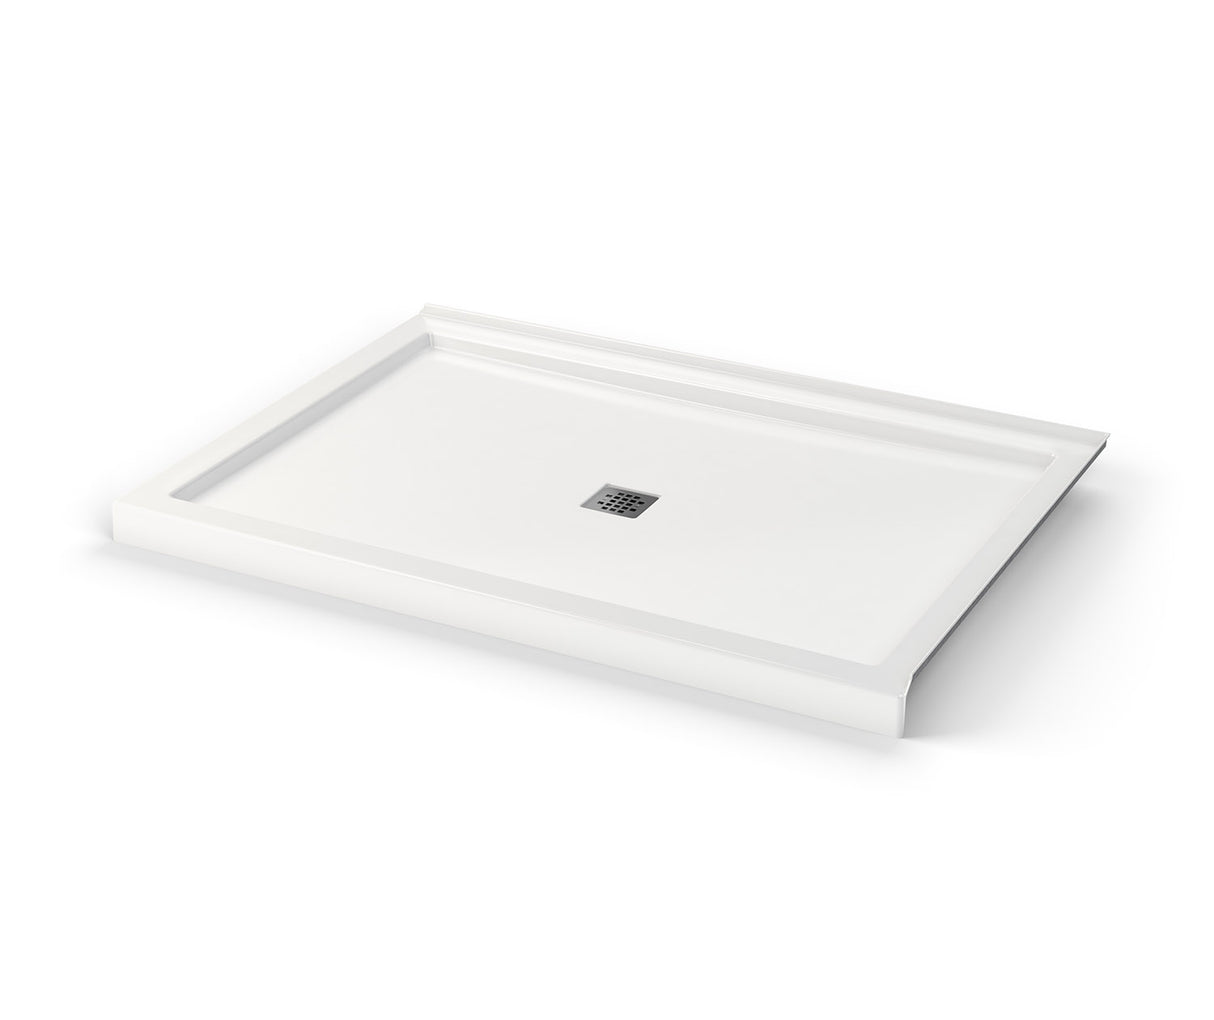 MAAX 420036-503-001-100 B3Square 6042 Acrylic Corner Right Shower Base in White with Center Drain